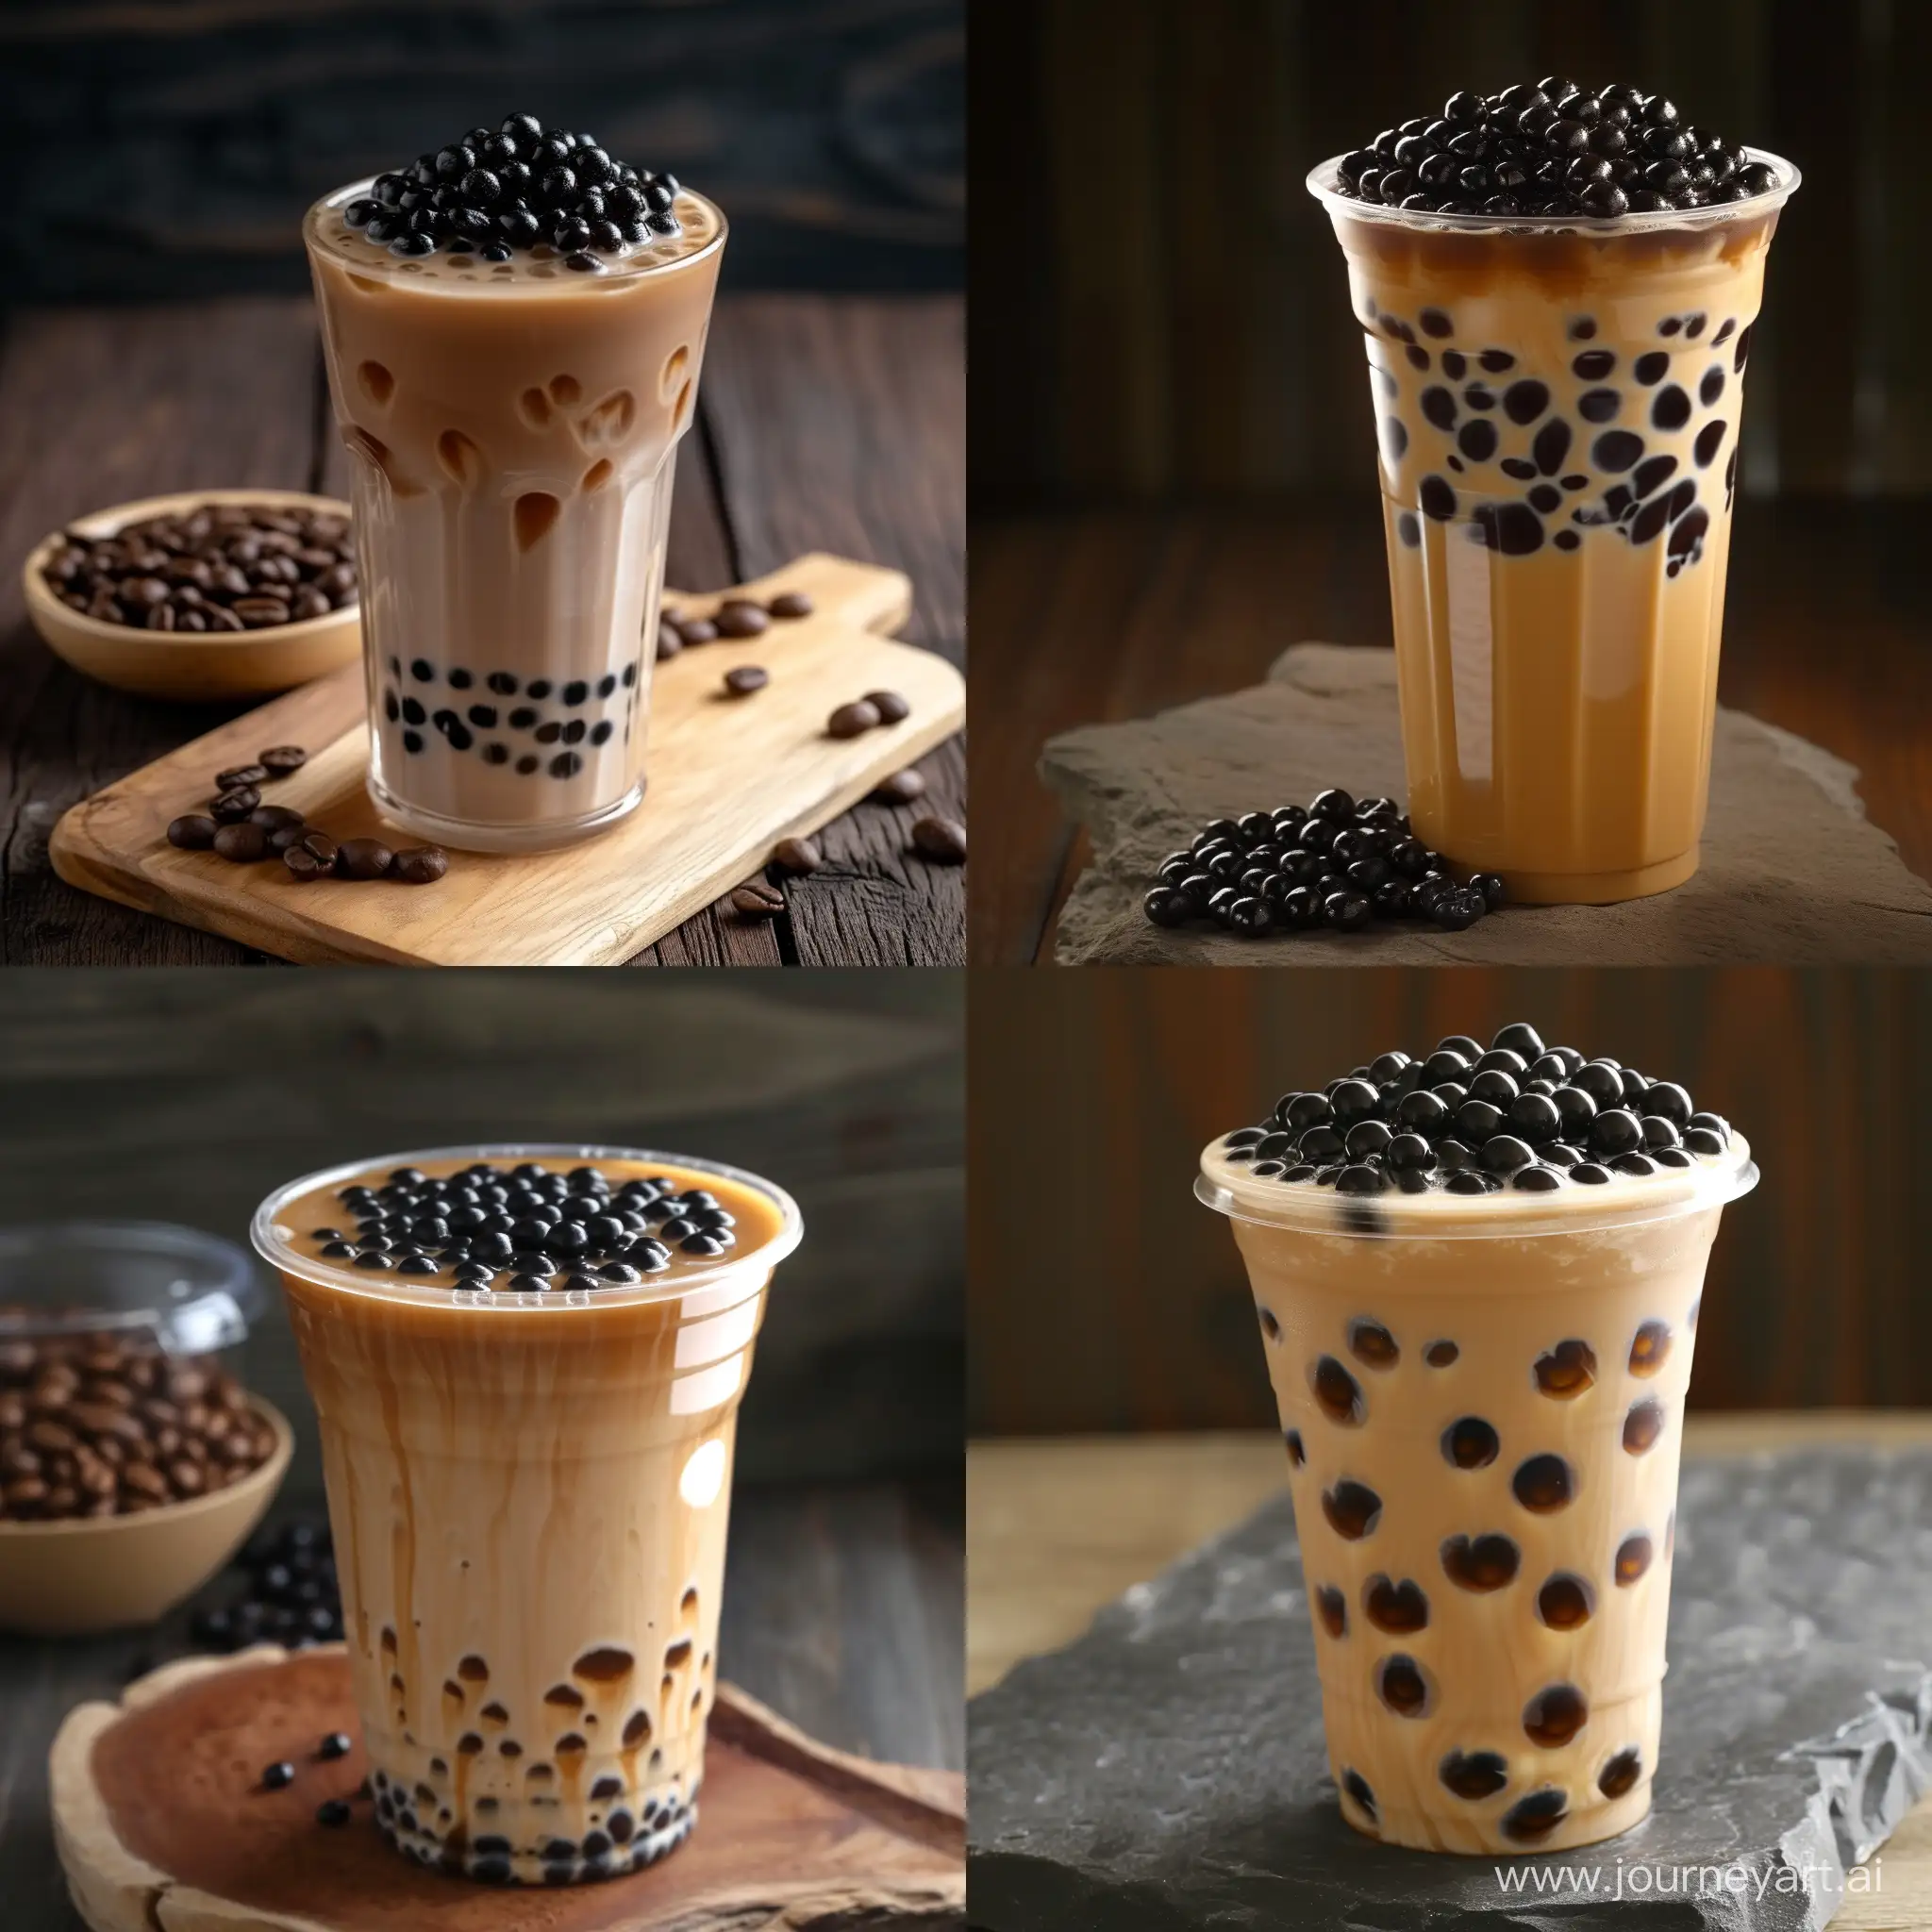 a cup of black sugar pearl milk tea, real, realistic images, real milk tea photos, detailed photos, image photography, coffee photos